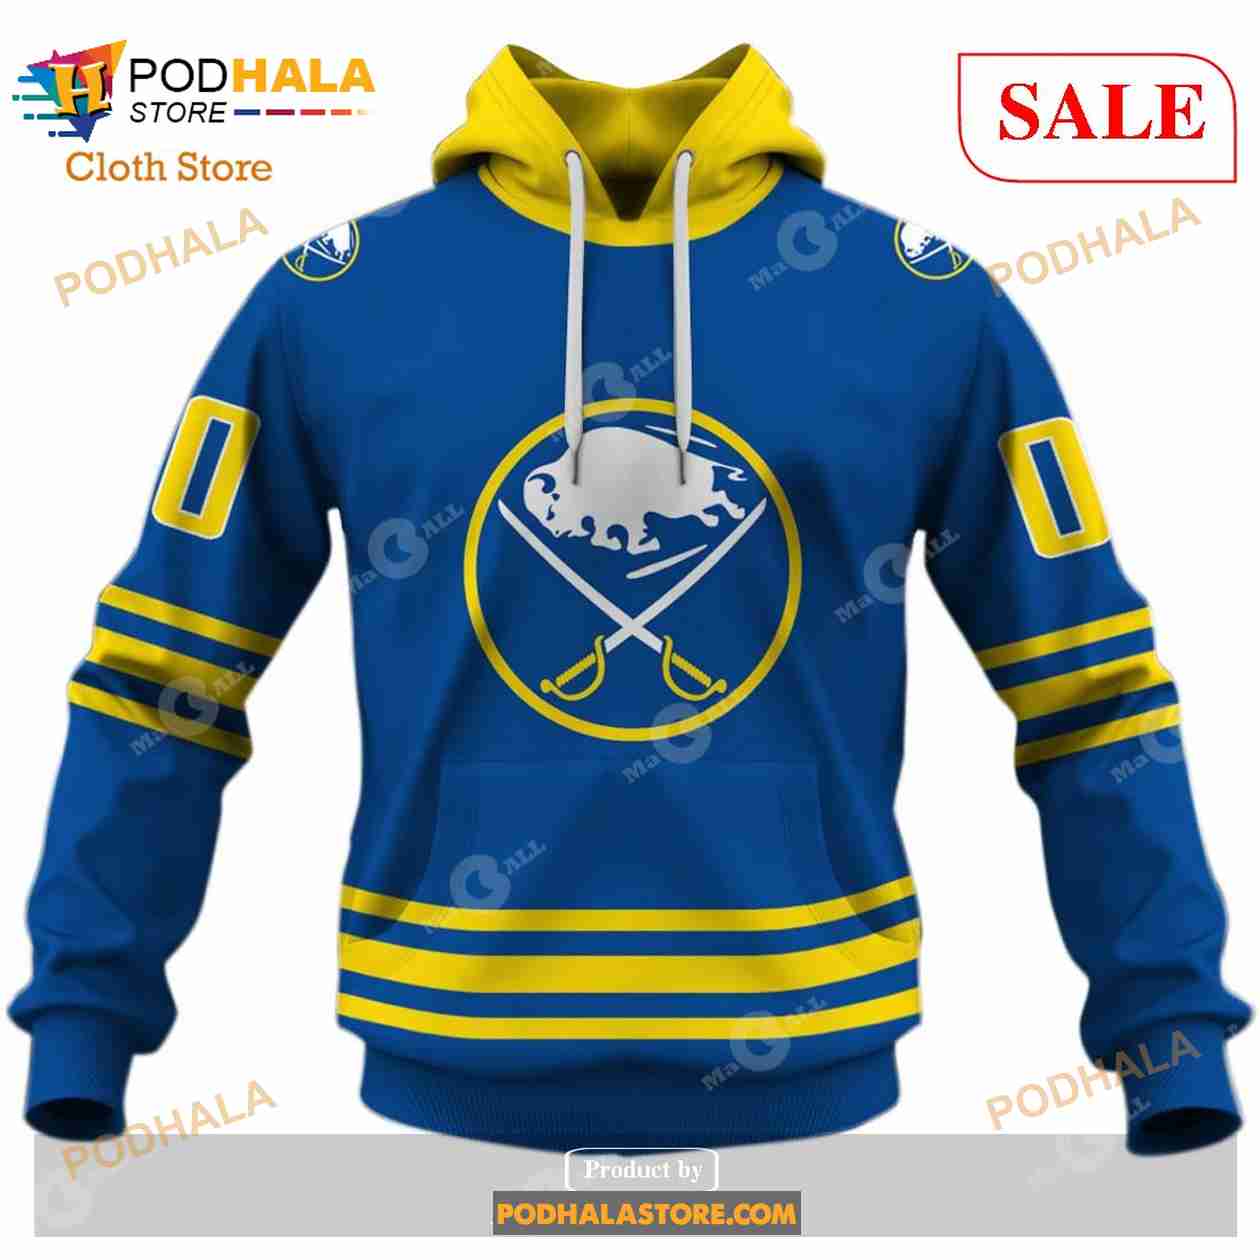 NHL Buffalo Sabres Custom Name Number Retro White Jersey Fleece Oodie